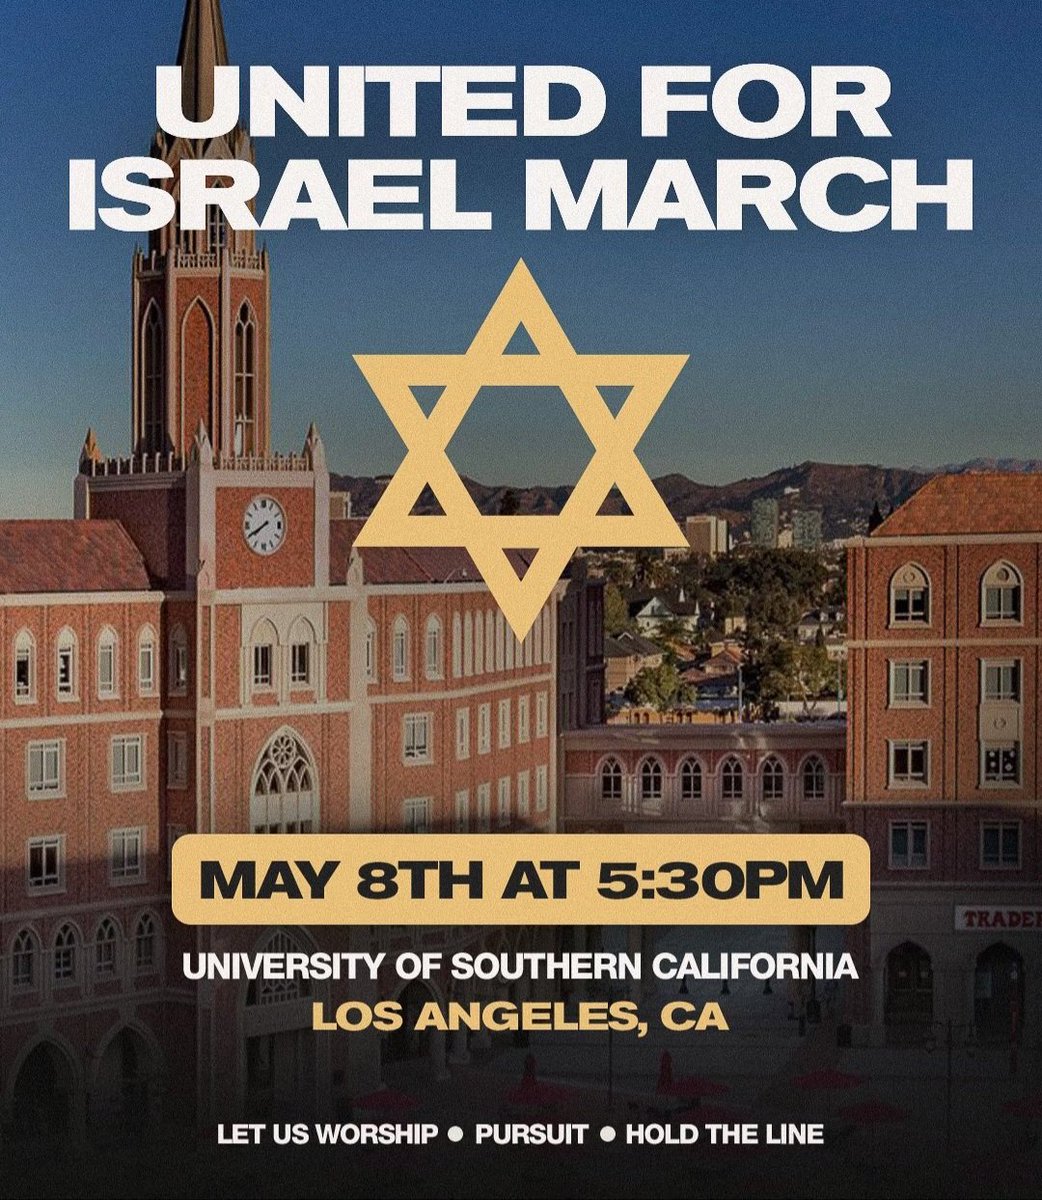 Happening now!
#UnitedForIsraelMarch 🇮🇱🇮🇱🇮🇱🇮🇱
Los Angeles CA at #USC
#standforIsrael 
Support Israel & Jewish Students
🇮🇱🇮🇱🇮🇱🇮🇱🇮🇱🇮🇱🇮🇱🇮🇱🇮🇱🇮🇱🇮🇱🇮🇱🇮🇱
🙏🙏🙏🙏🙏🙏🙏🙏🙏🇺🇲🇺🇲🇺🇲🇺🇲
@russellbjohnson
@seanfeucht 
Join them if you are in the area!!!